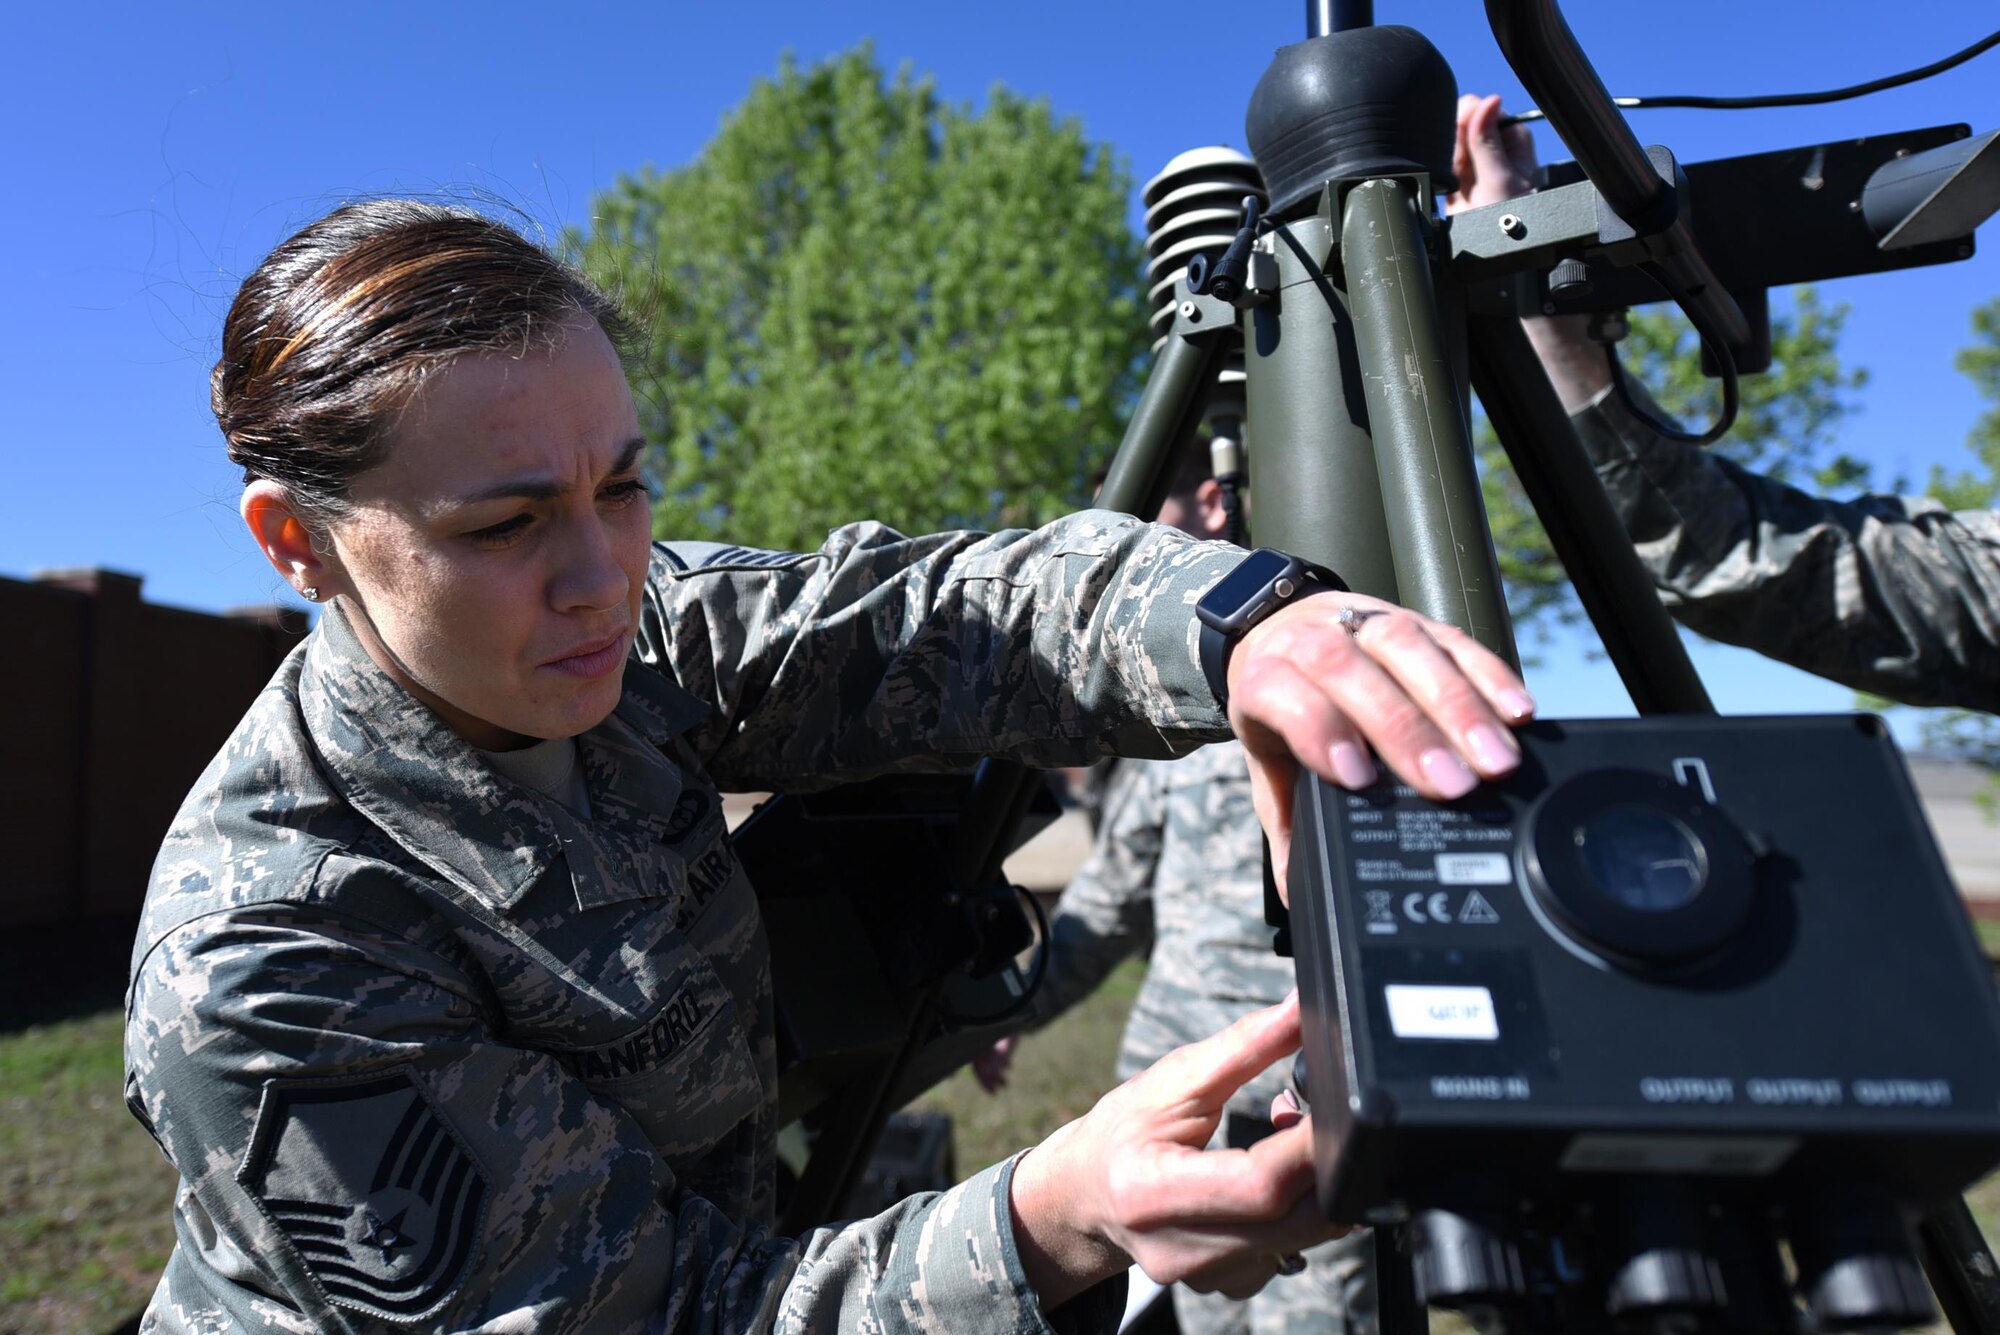 U.S. Air Force Master Sgt. April Stanford, 19th Operations Support Squadron Weather Flight Chief, works on a Tactical Meteorological Observing System March 8, 2017, at Little Rock Air Force Base, Ark. The equipment is a transportable system used in deployed locations to collect essential weather data for ground and flying operations. (U.S. Air Force photo by Airman 1st Class Kevin Sommer Giron)